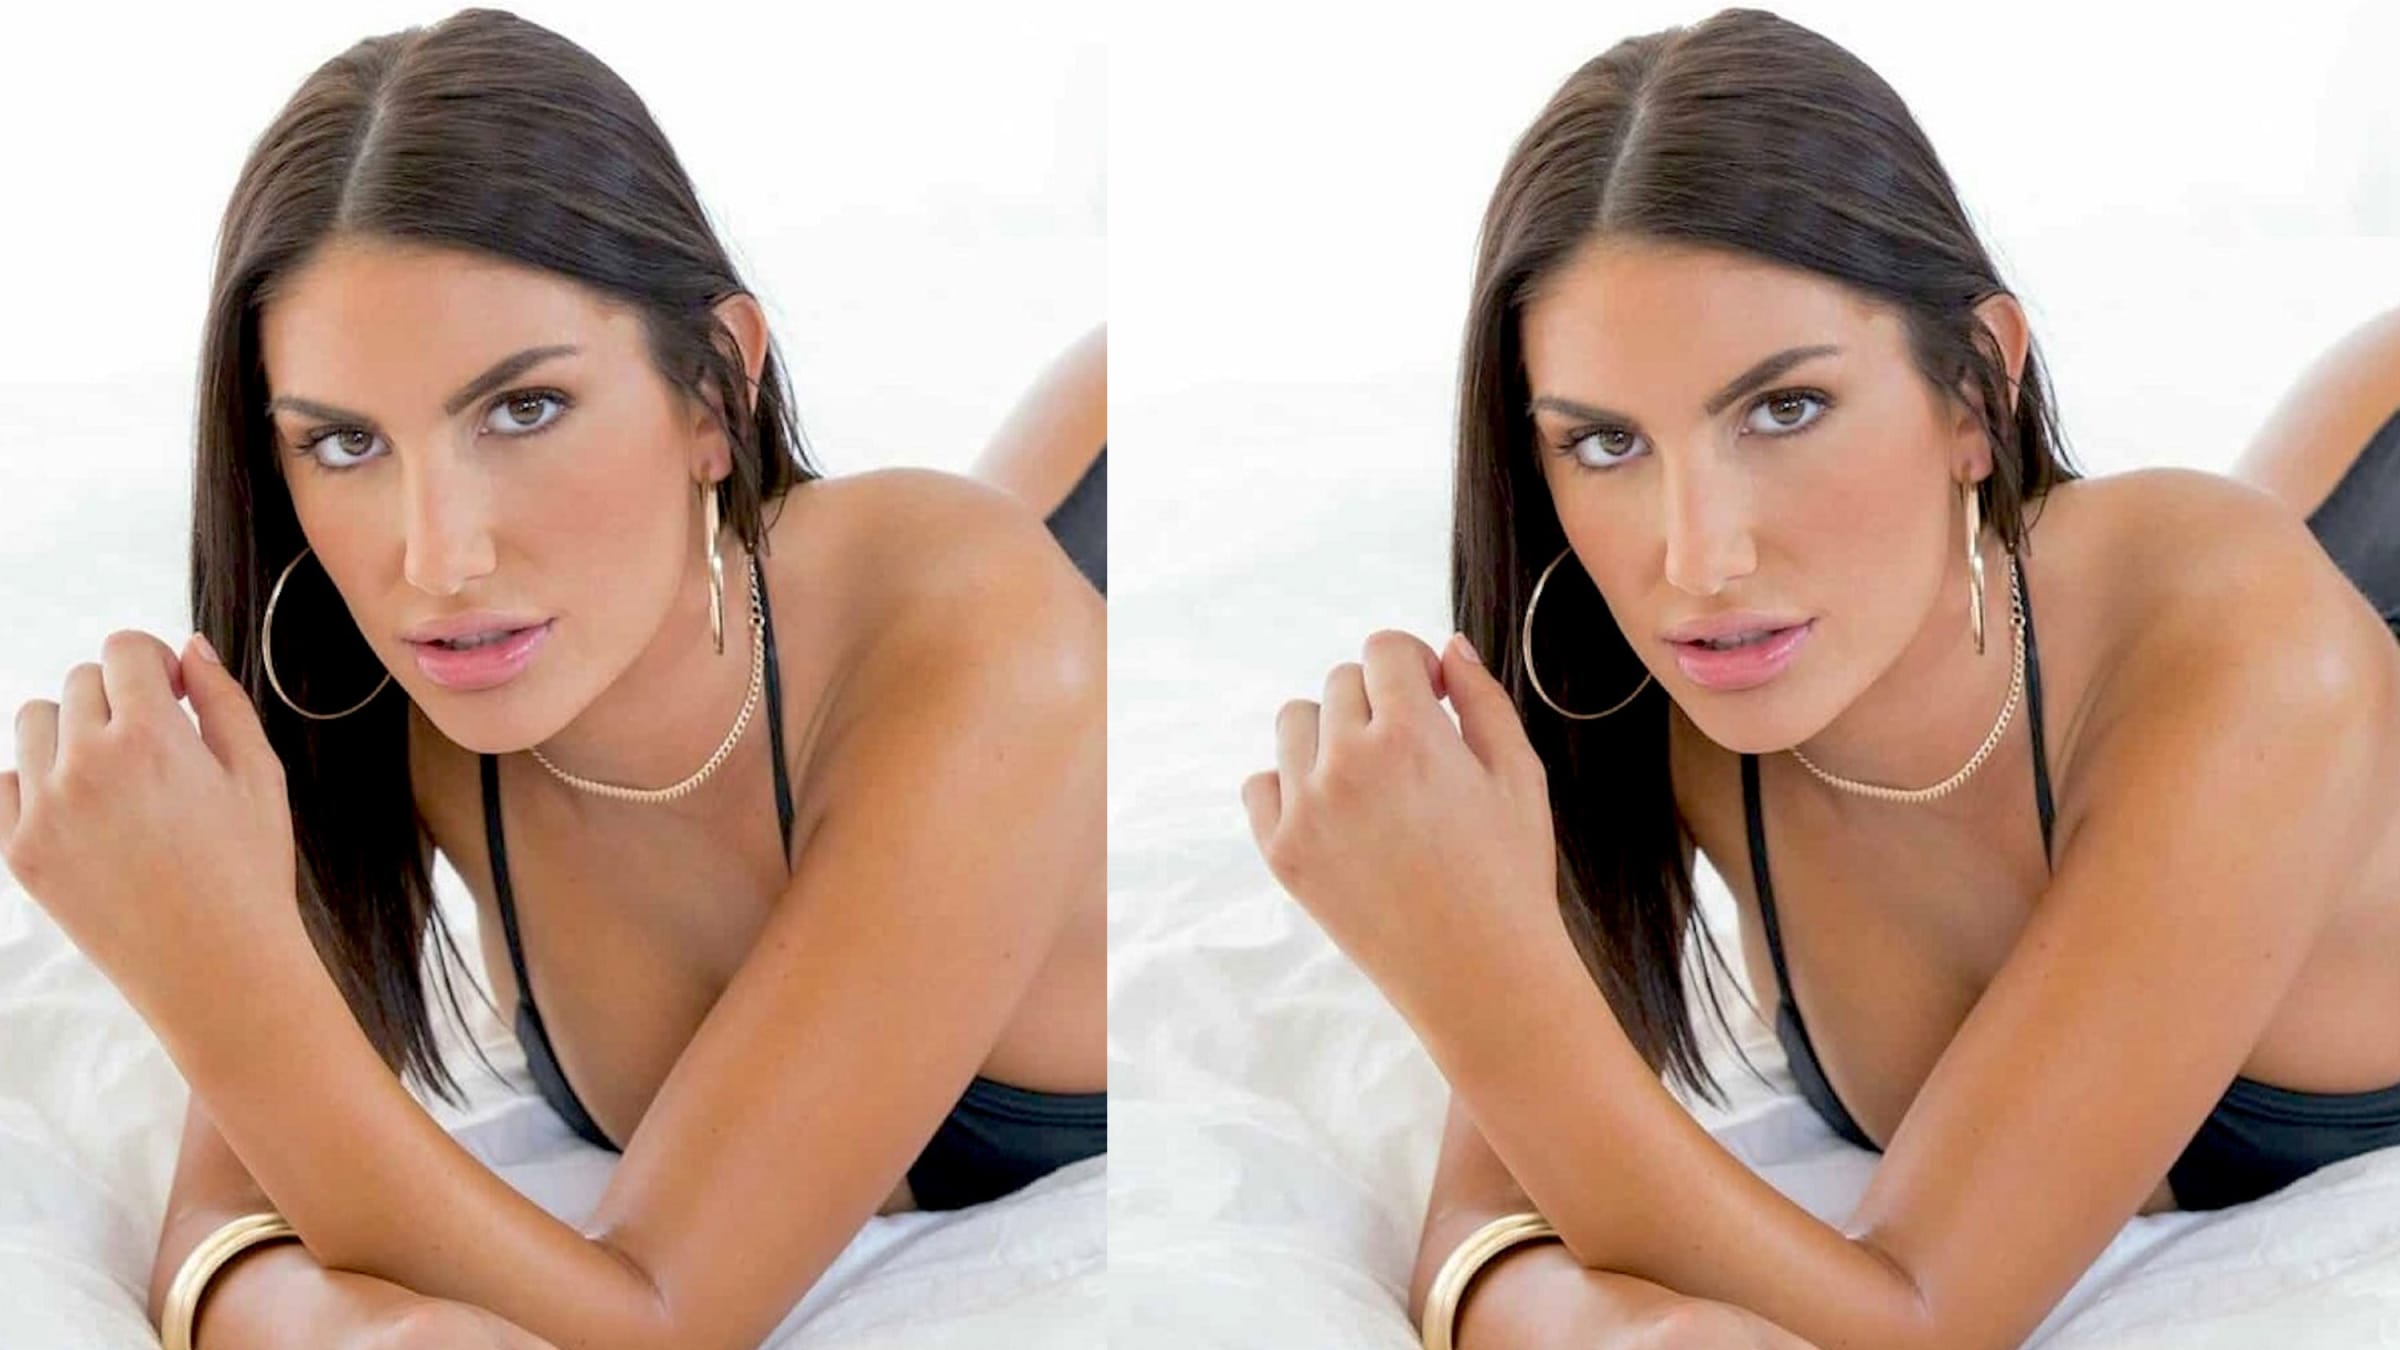 Mother of 'Cyberbullied' Porn Star August Ames Opens Up About Her Last Days